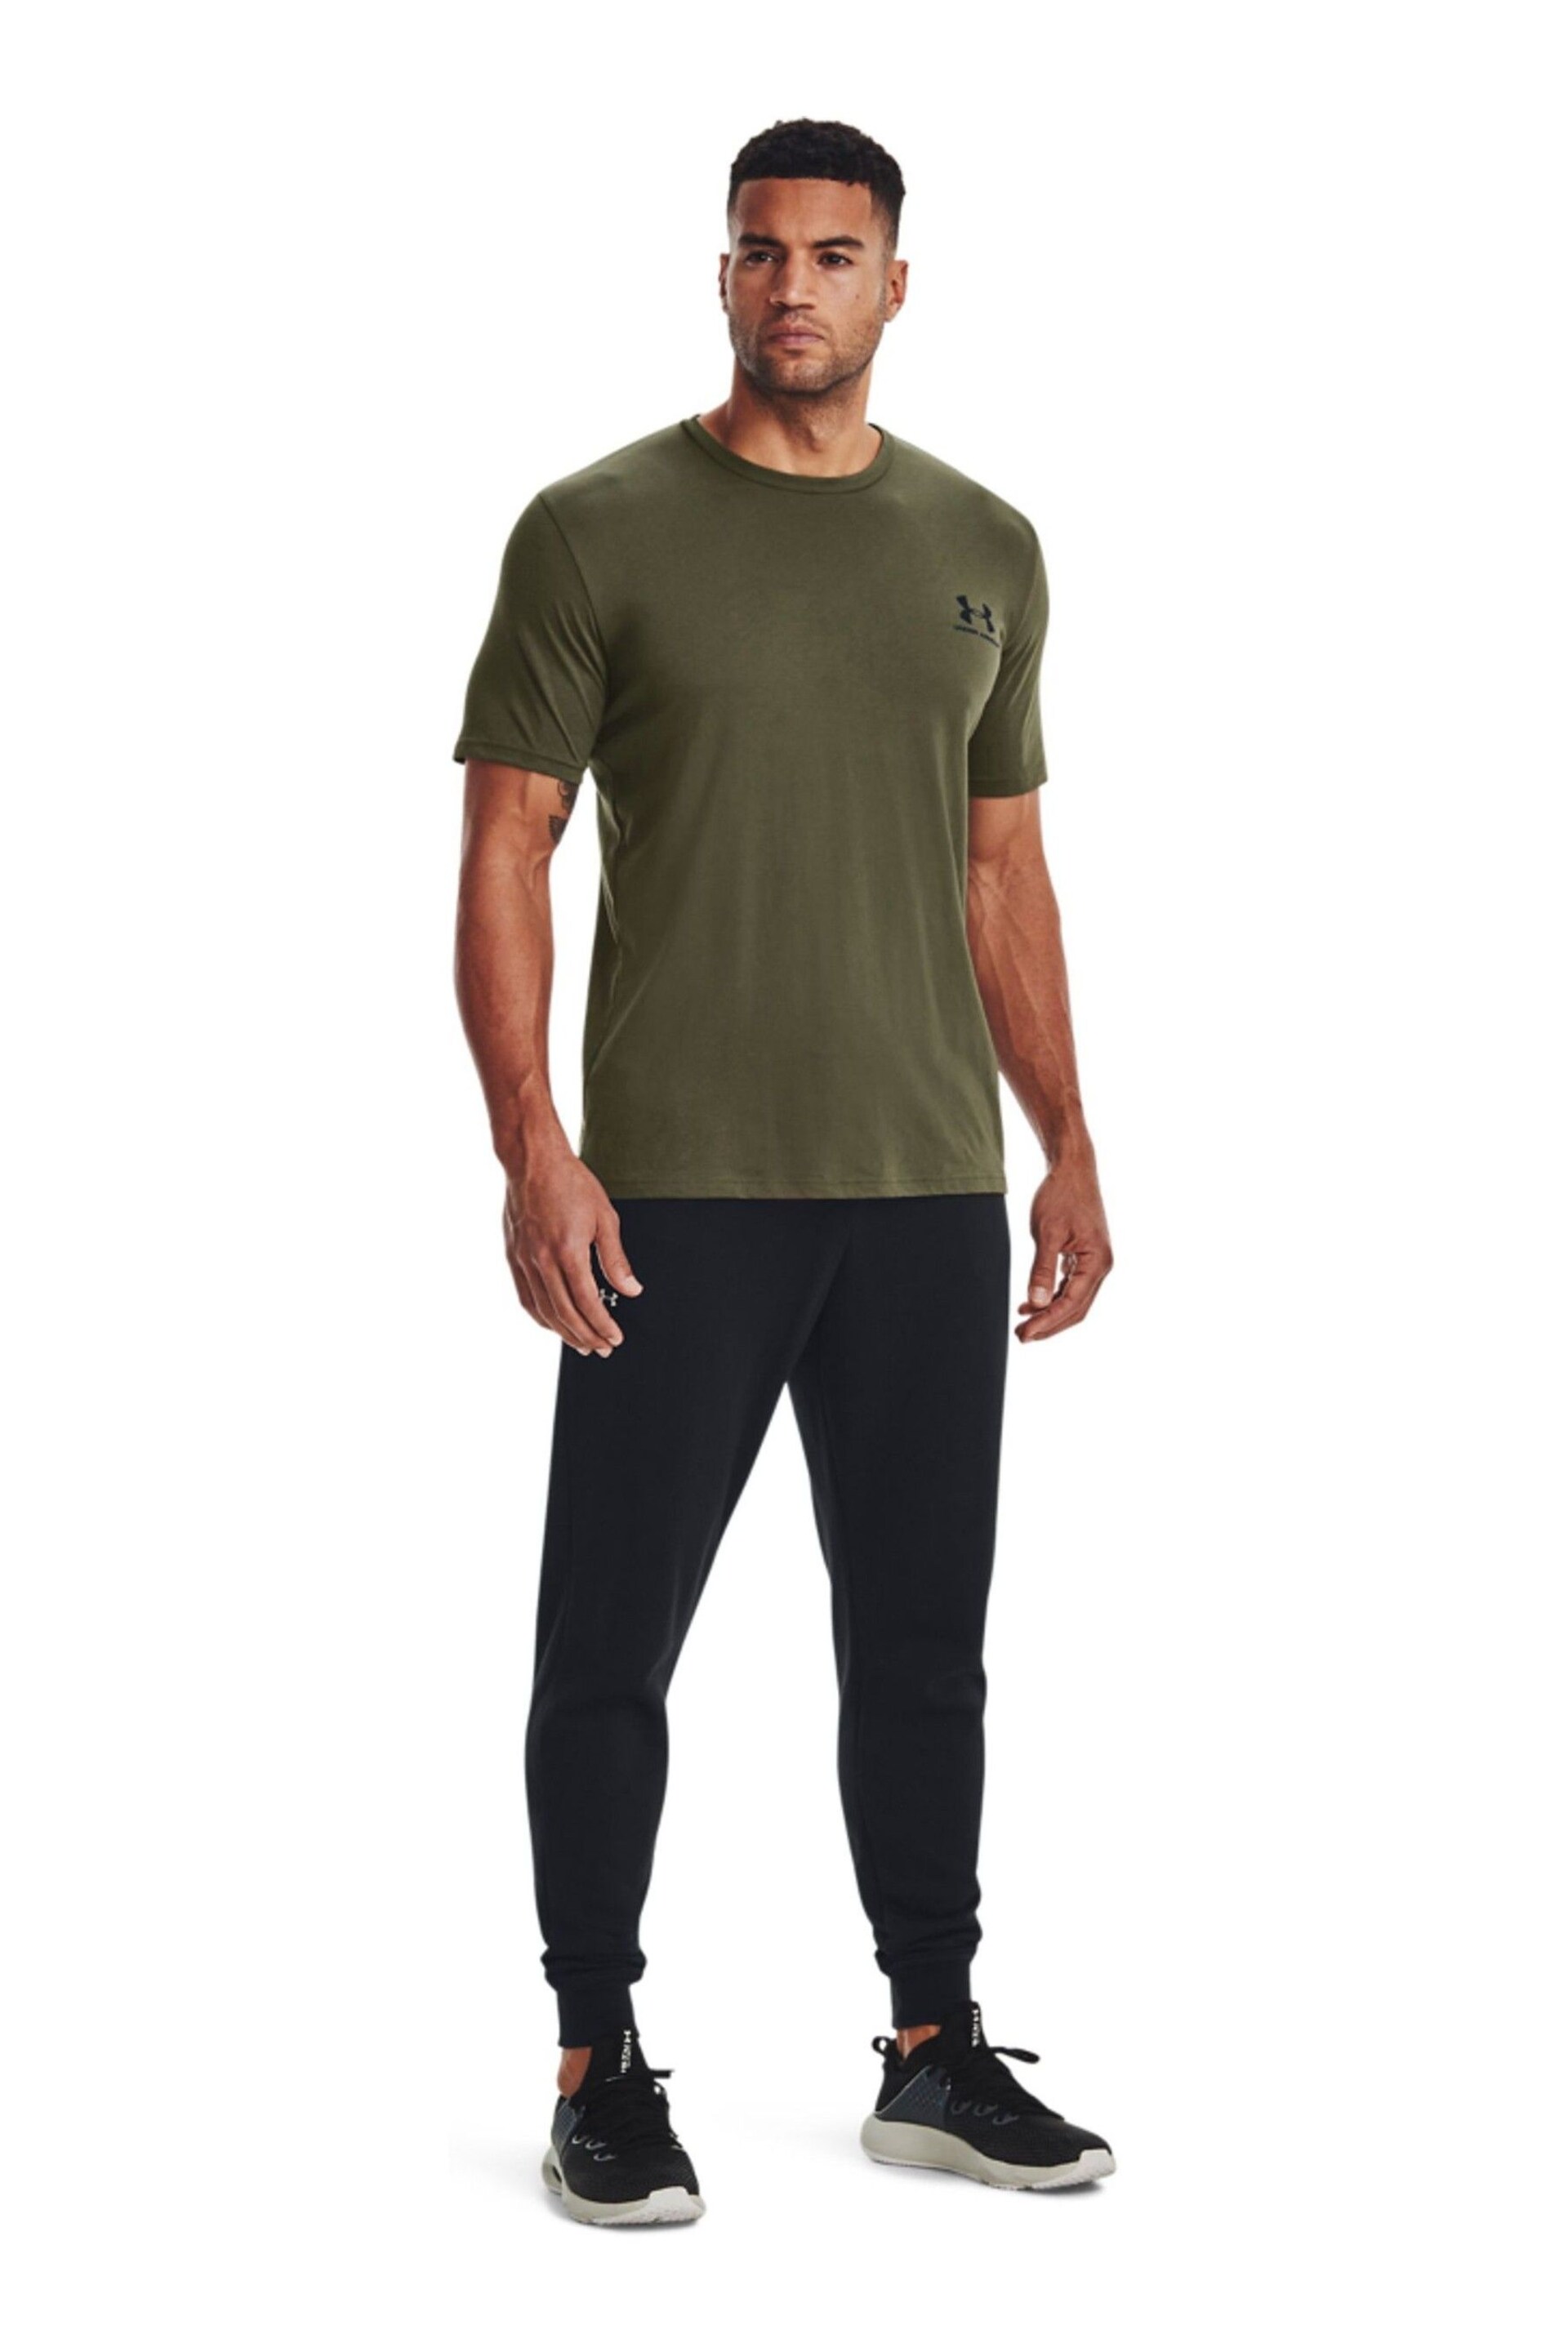 Under Armour Green Under Armour Left Chest Short Sleeve T-Shirt - Image 3 of 6